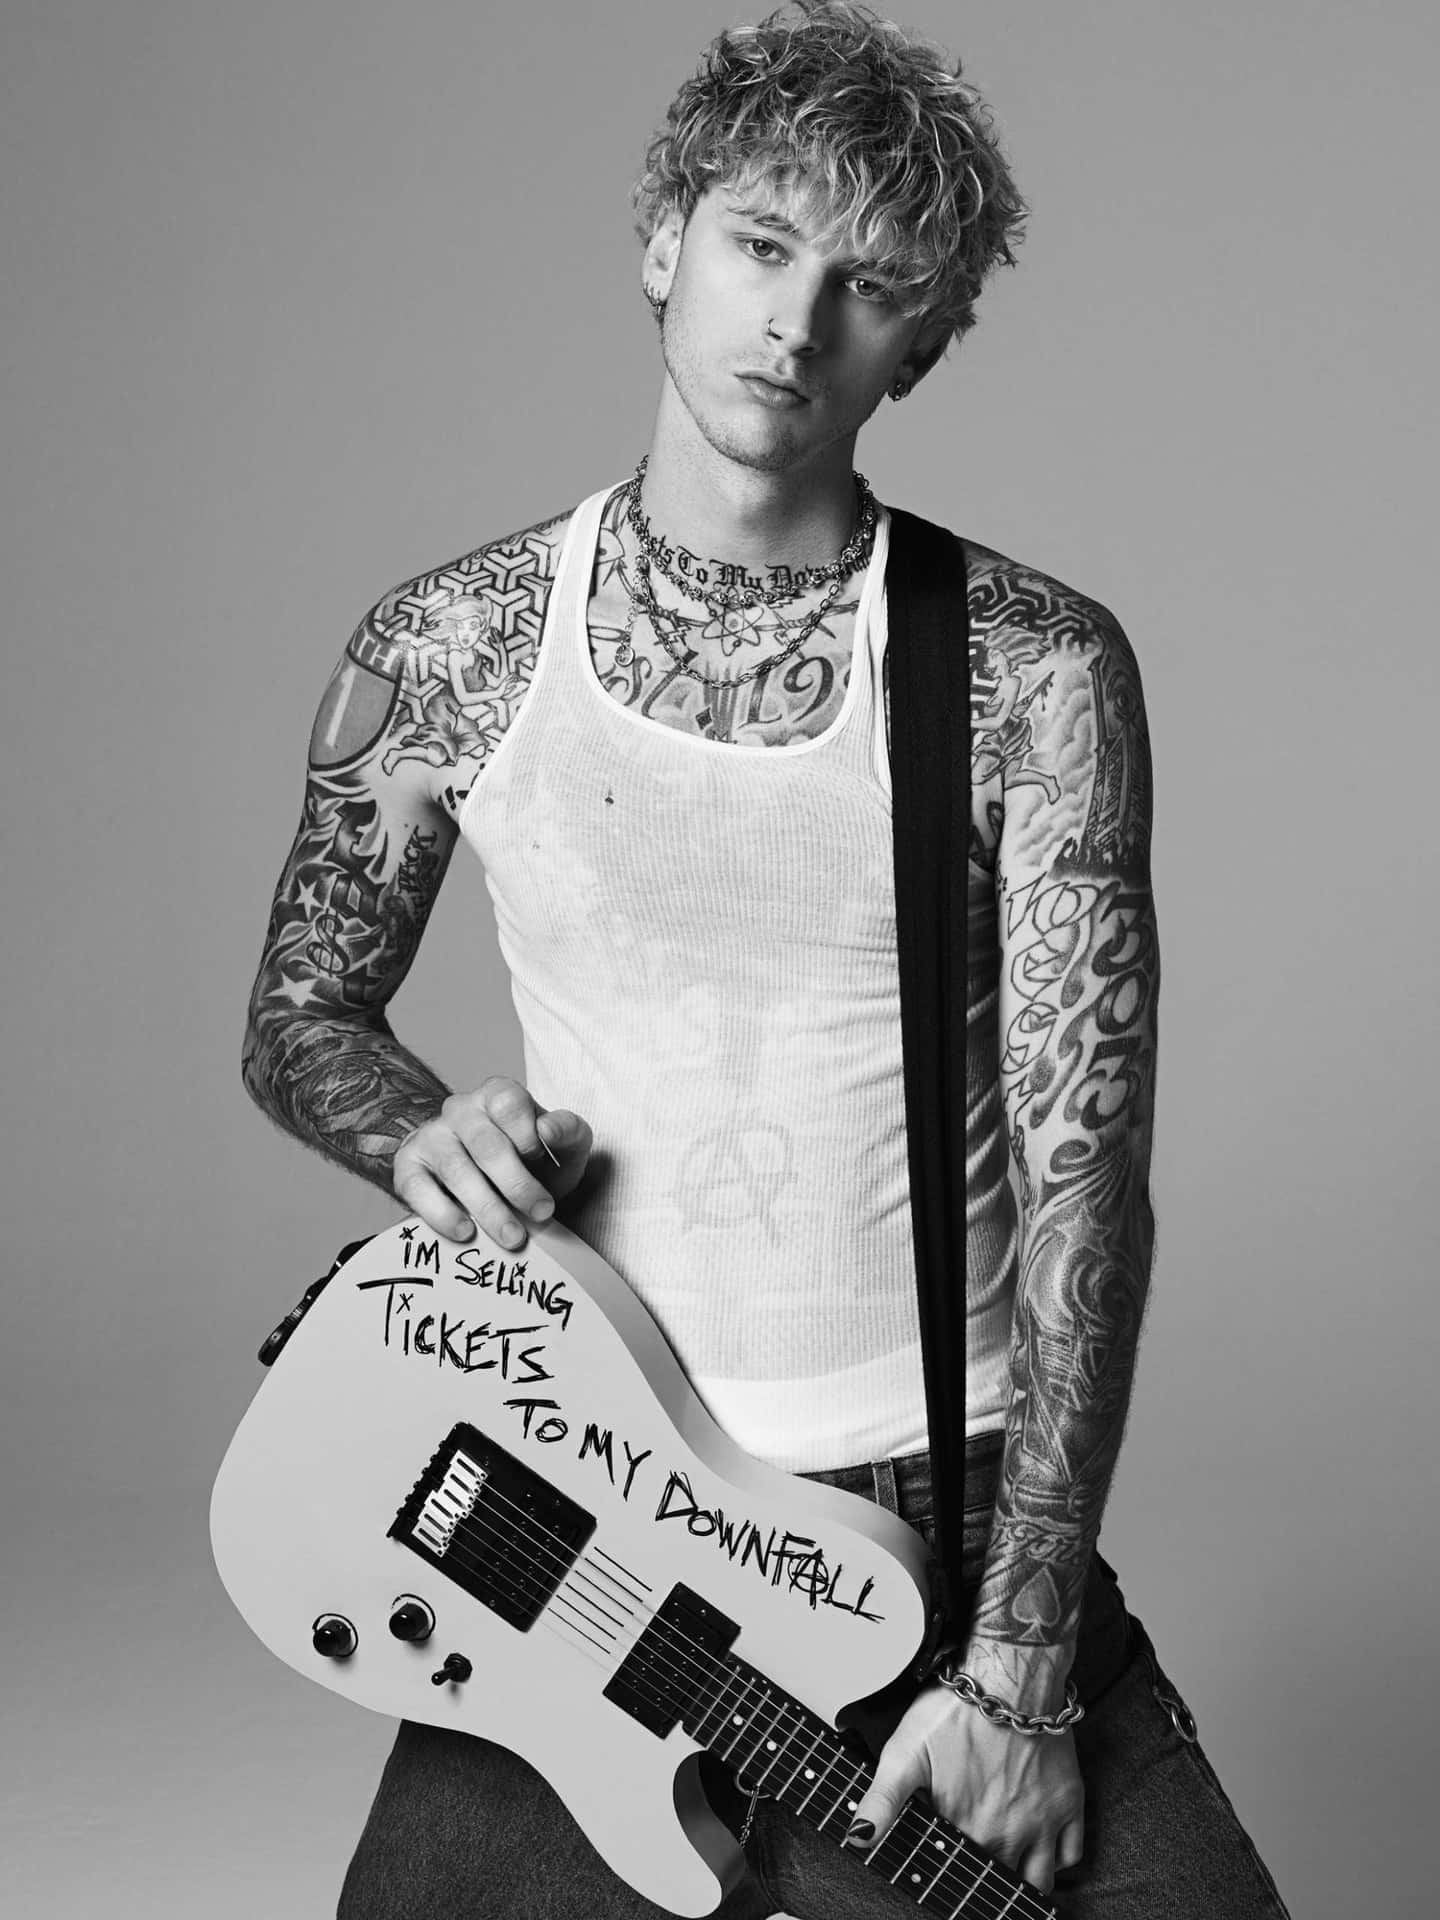 Tickets To My Downfall Machine Gun Kelly Black And White Wallpaper